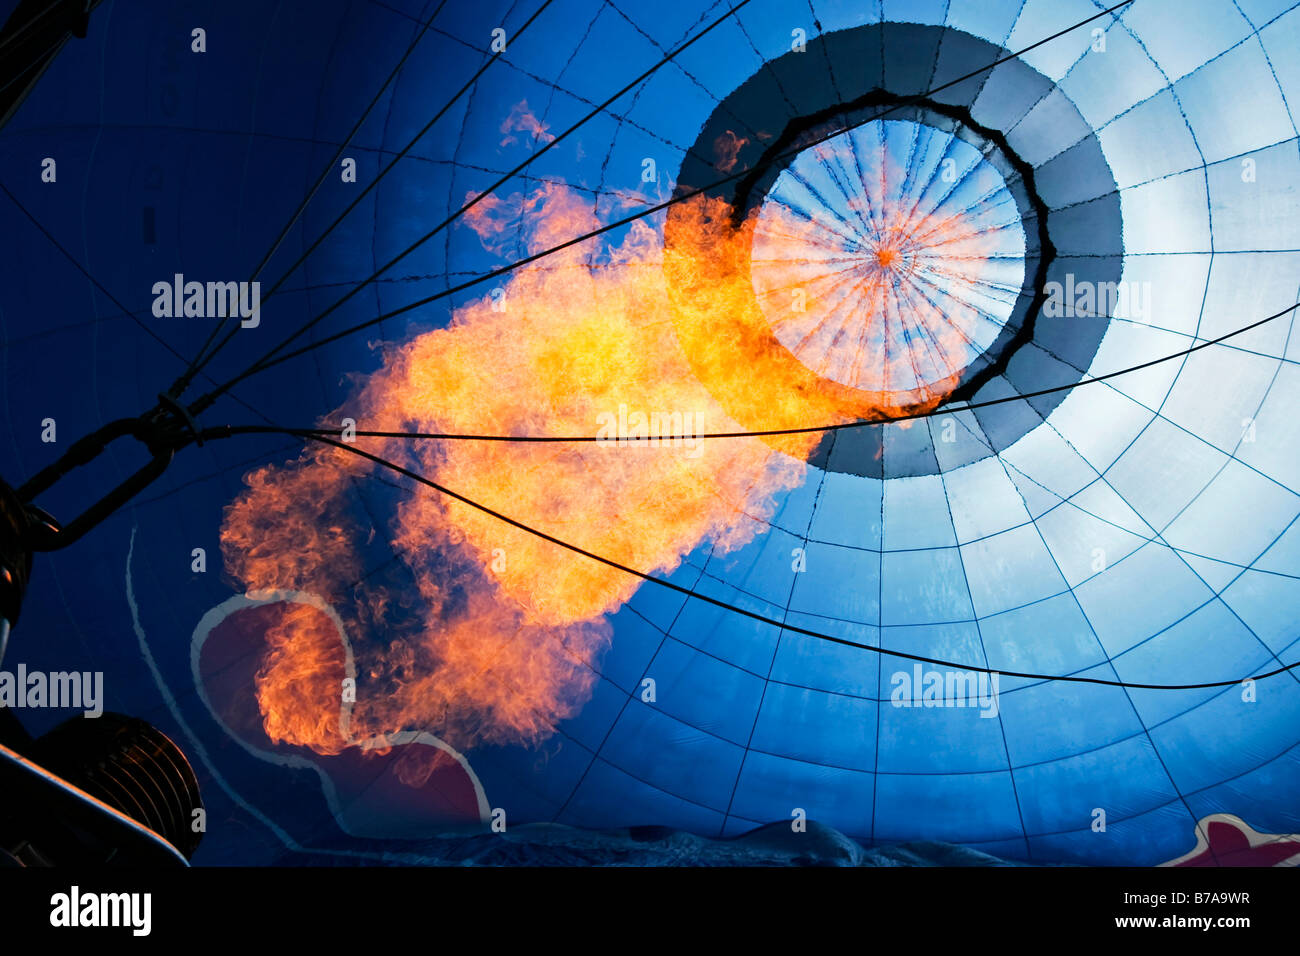 Hot air balloon being heated with a flame, Montgolfiade Bad Wiessee, Tegernsee, Bavaria, Germany, Europe Stock Photo